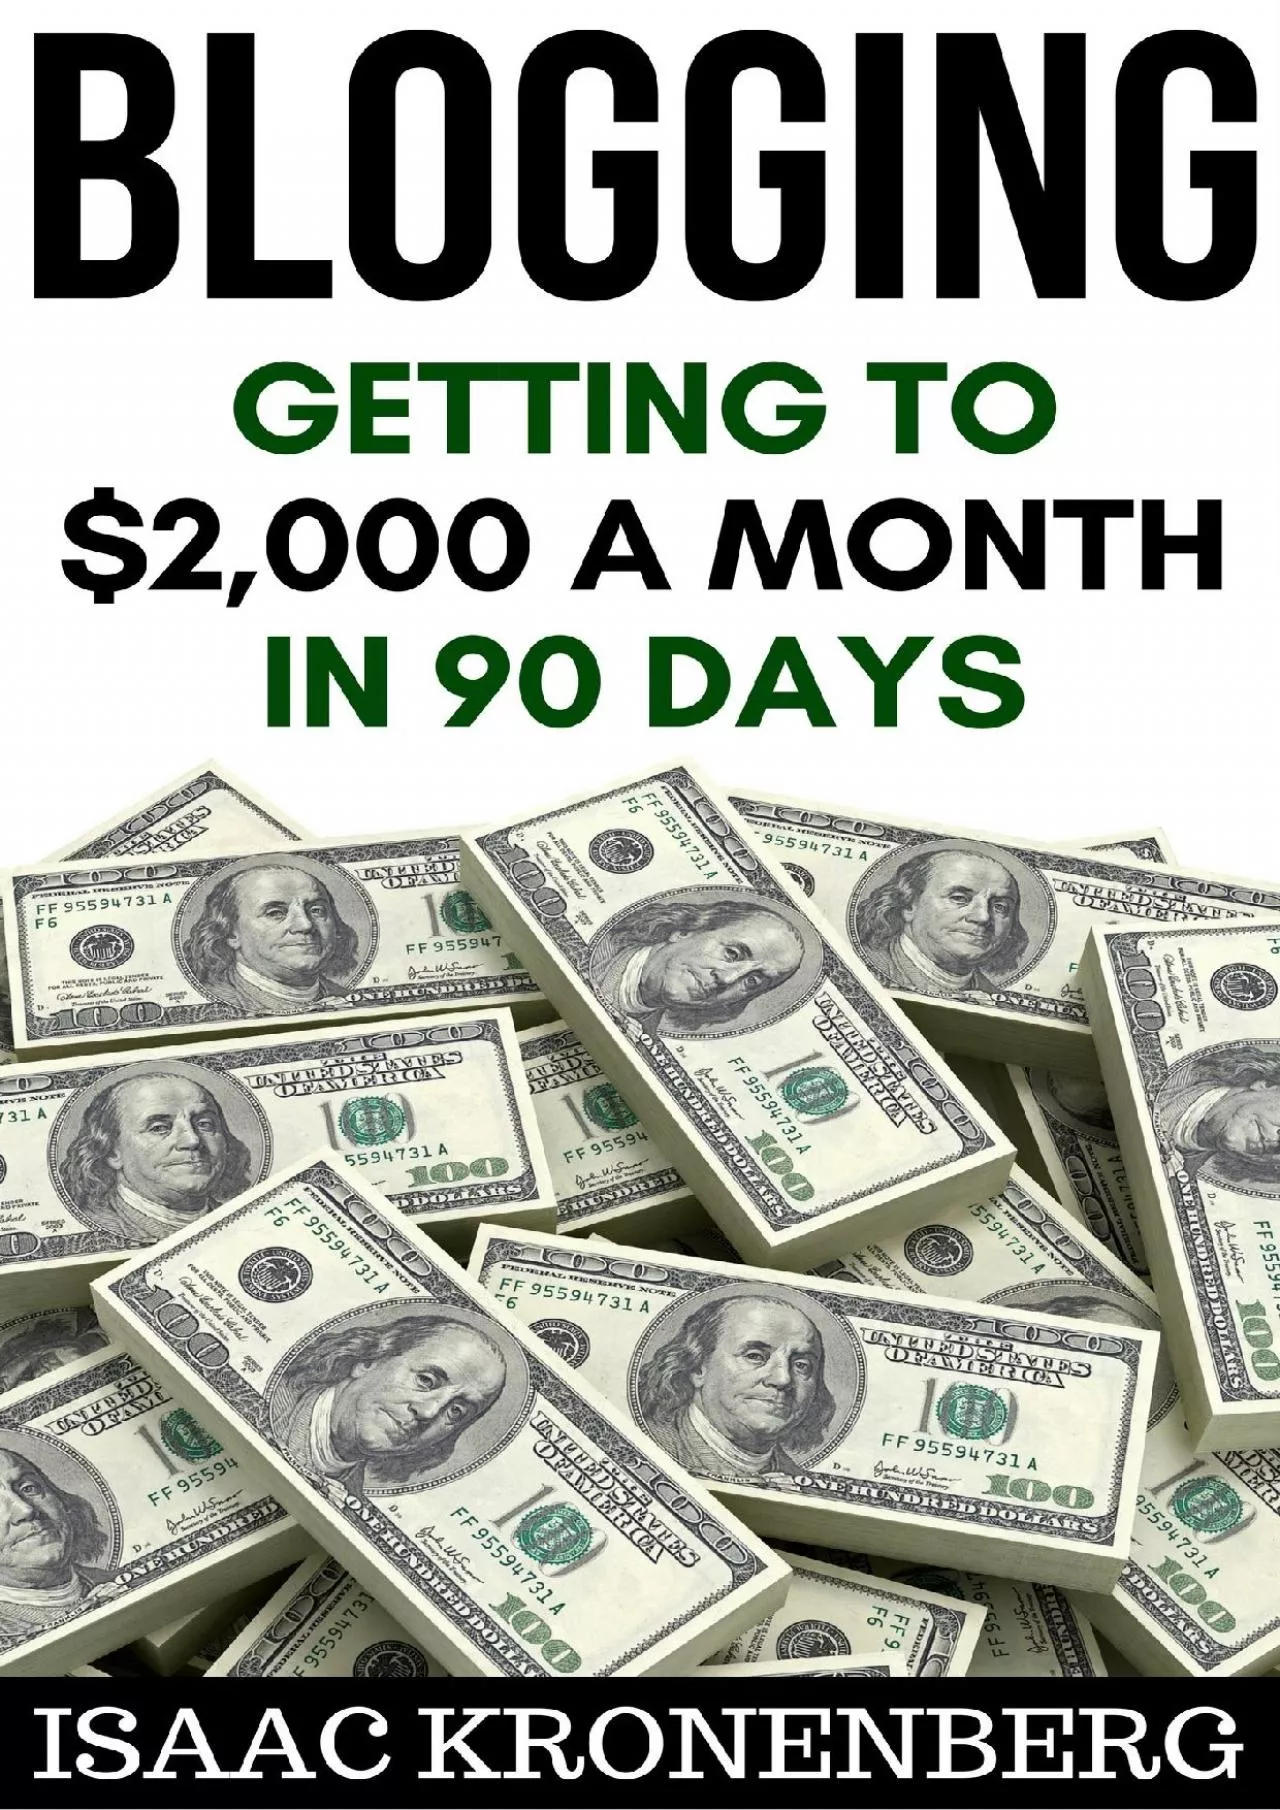 Blogging Getting To 2,000 A Month In 90 Days Blogging For Profit Book 2